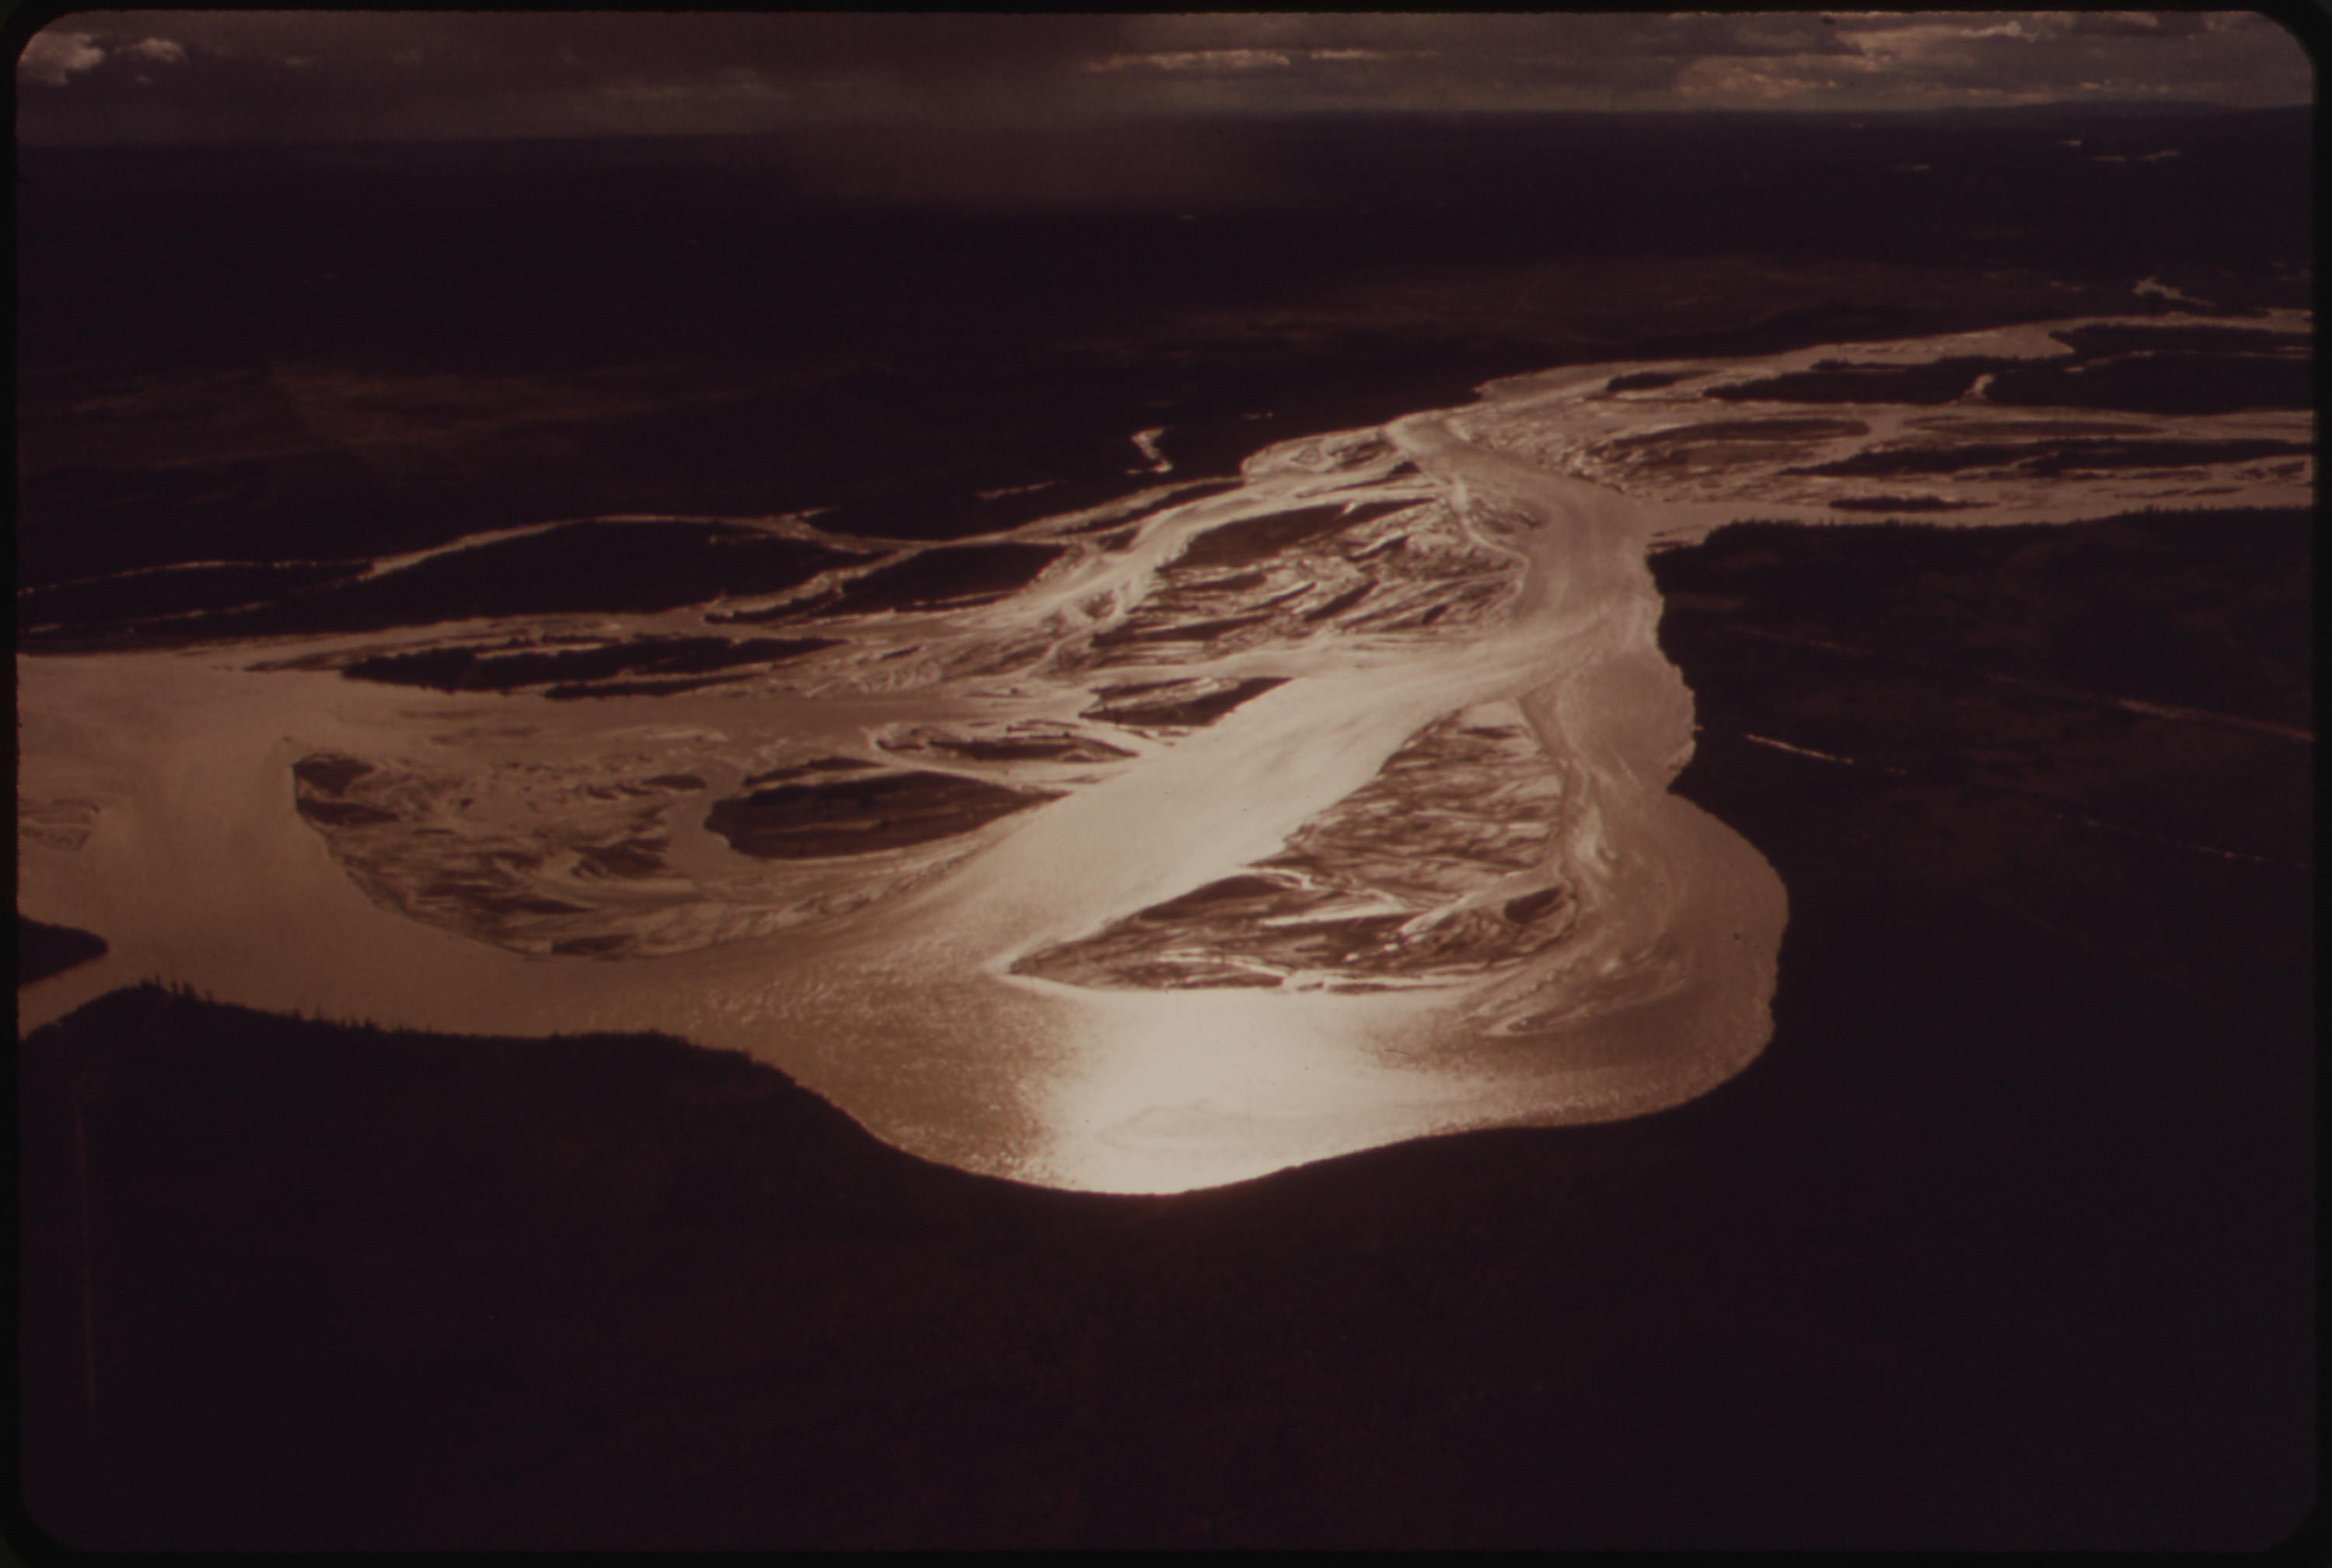 The Tanana River, View Southwest From a Point near Mile 455 the Pipeline Route Parallels the River for About 70 Miles South From Fairbanks to Delta Junction...08/1973